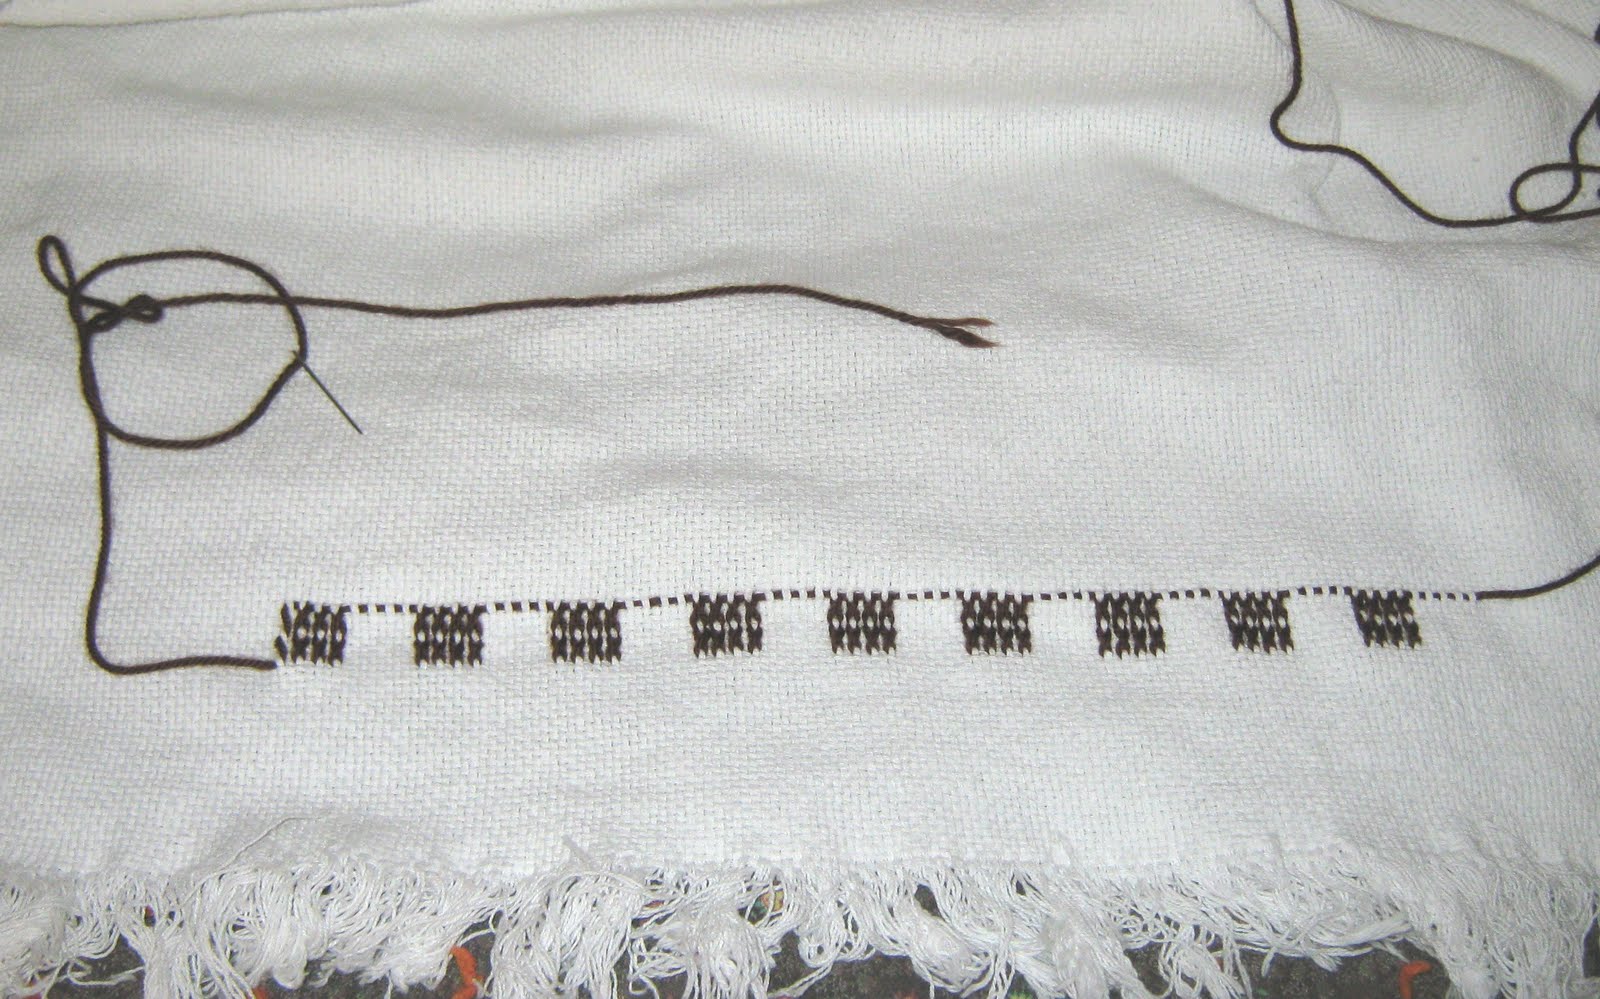 Ivy stitching: The Newest Project